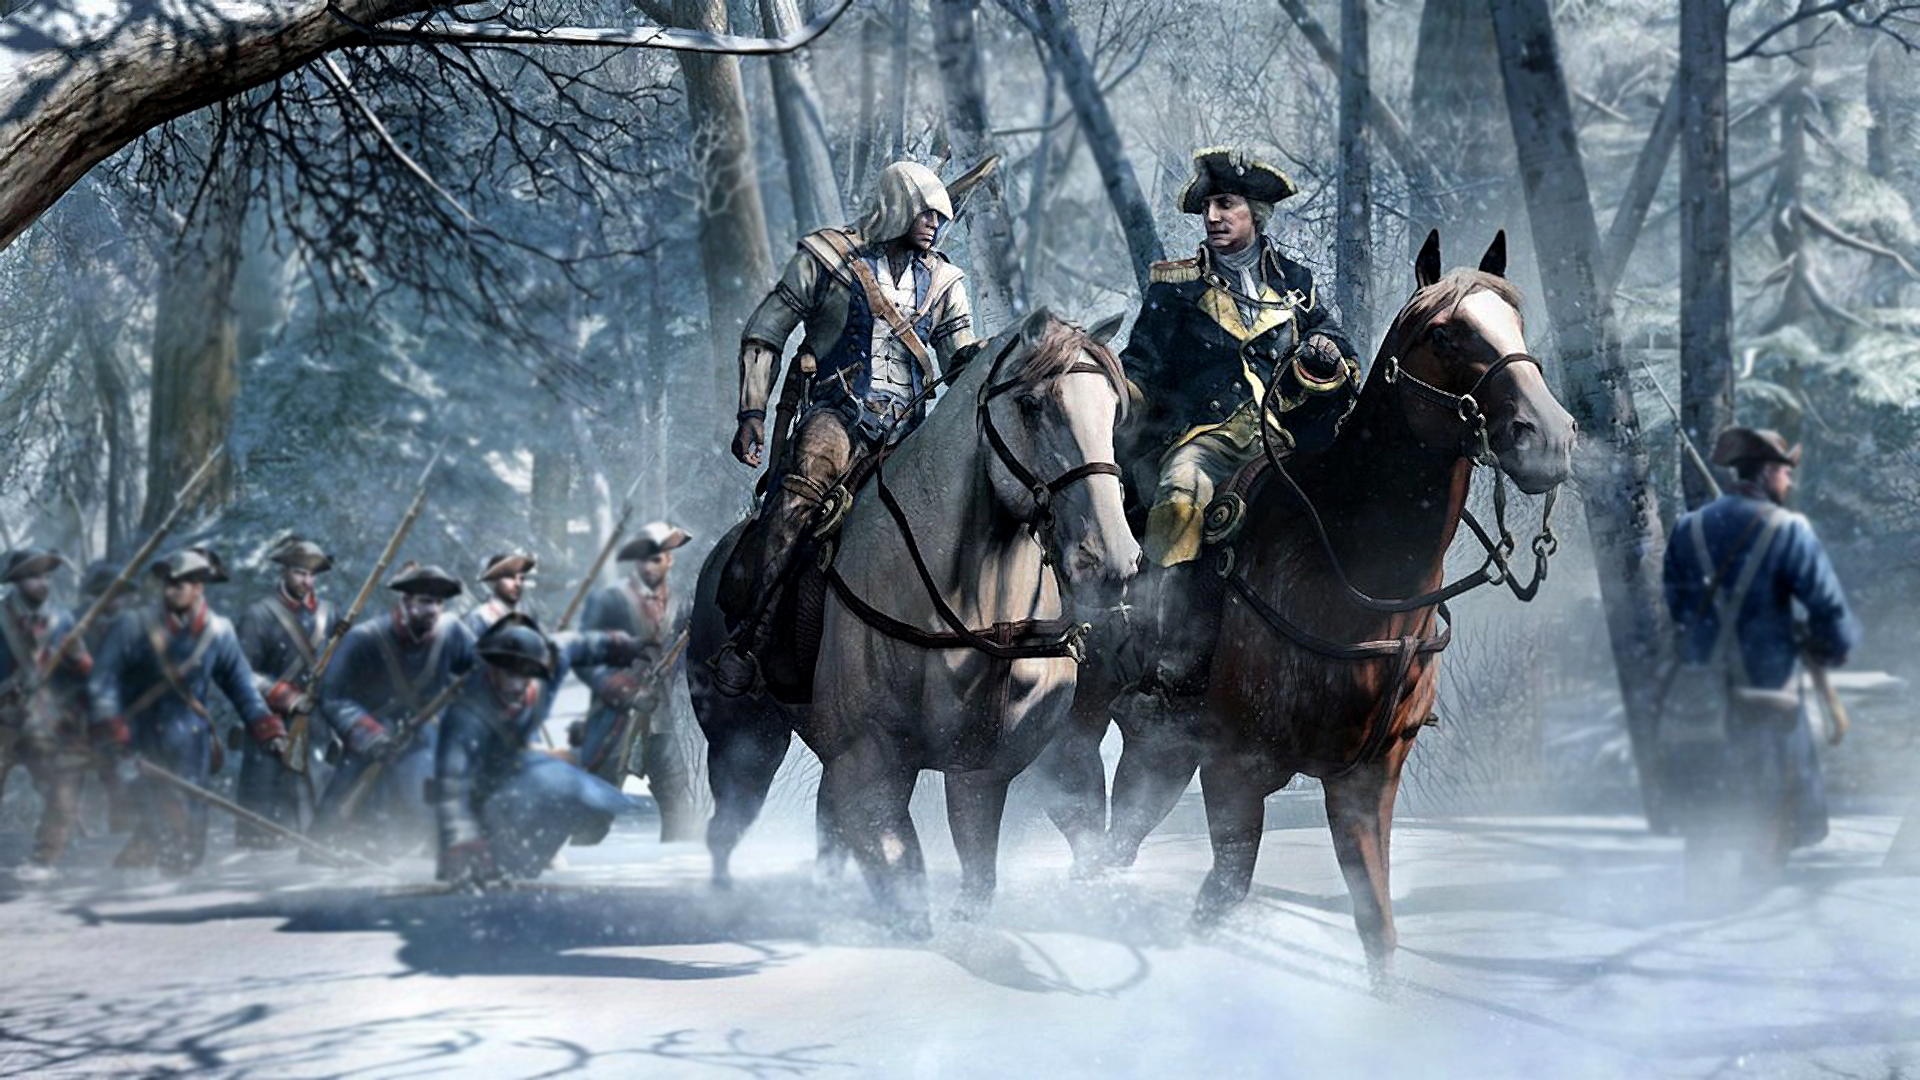 Video Game Assassin 039 S Creed Iii 1920x1080